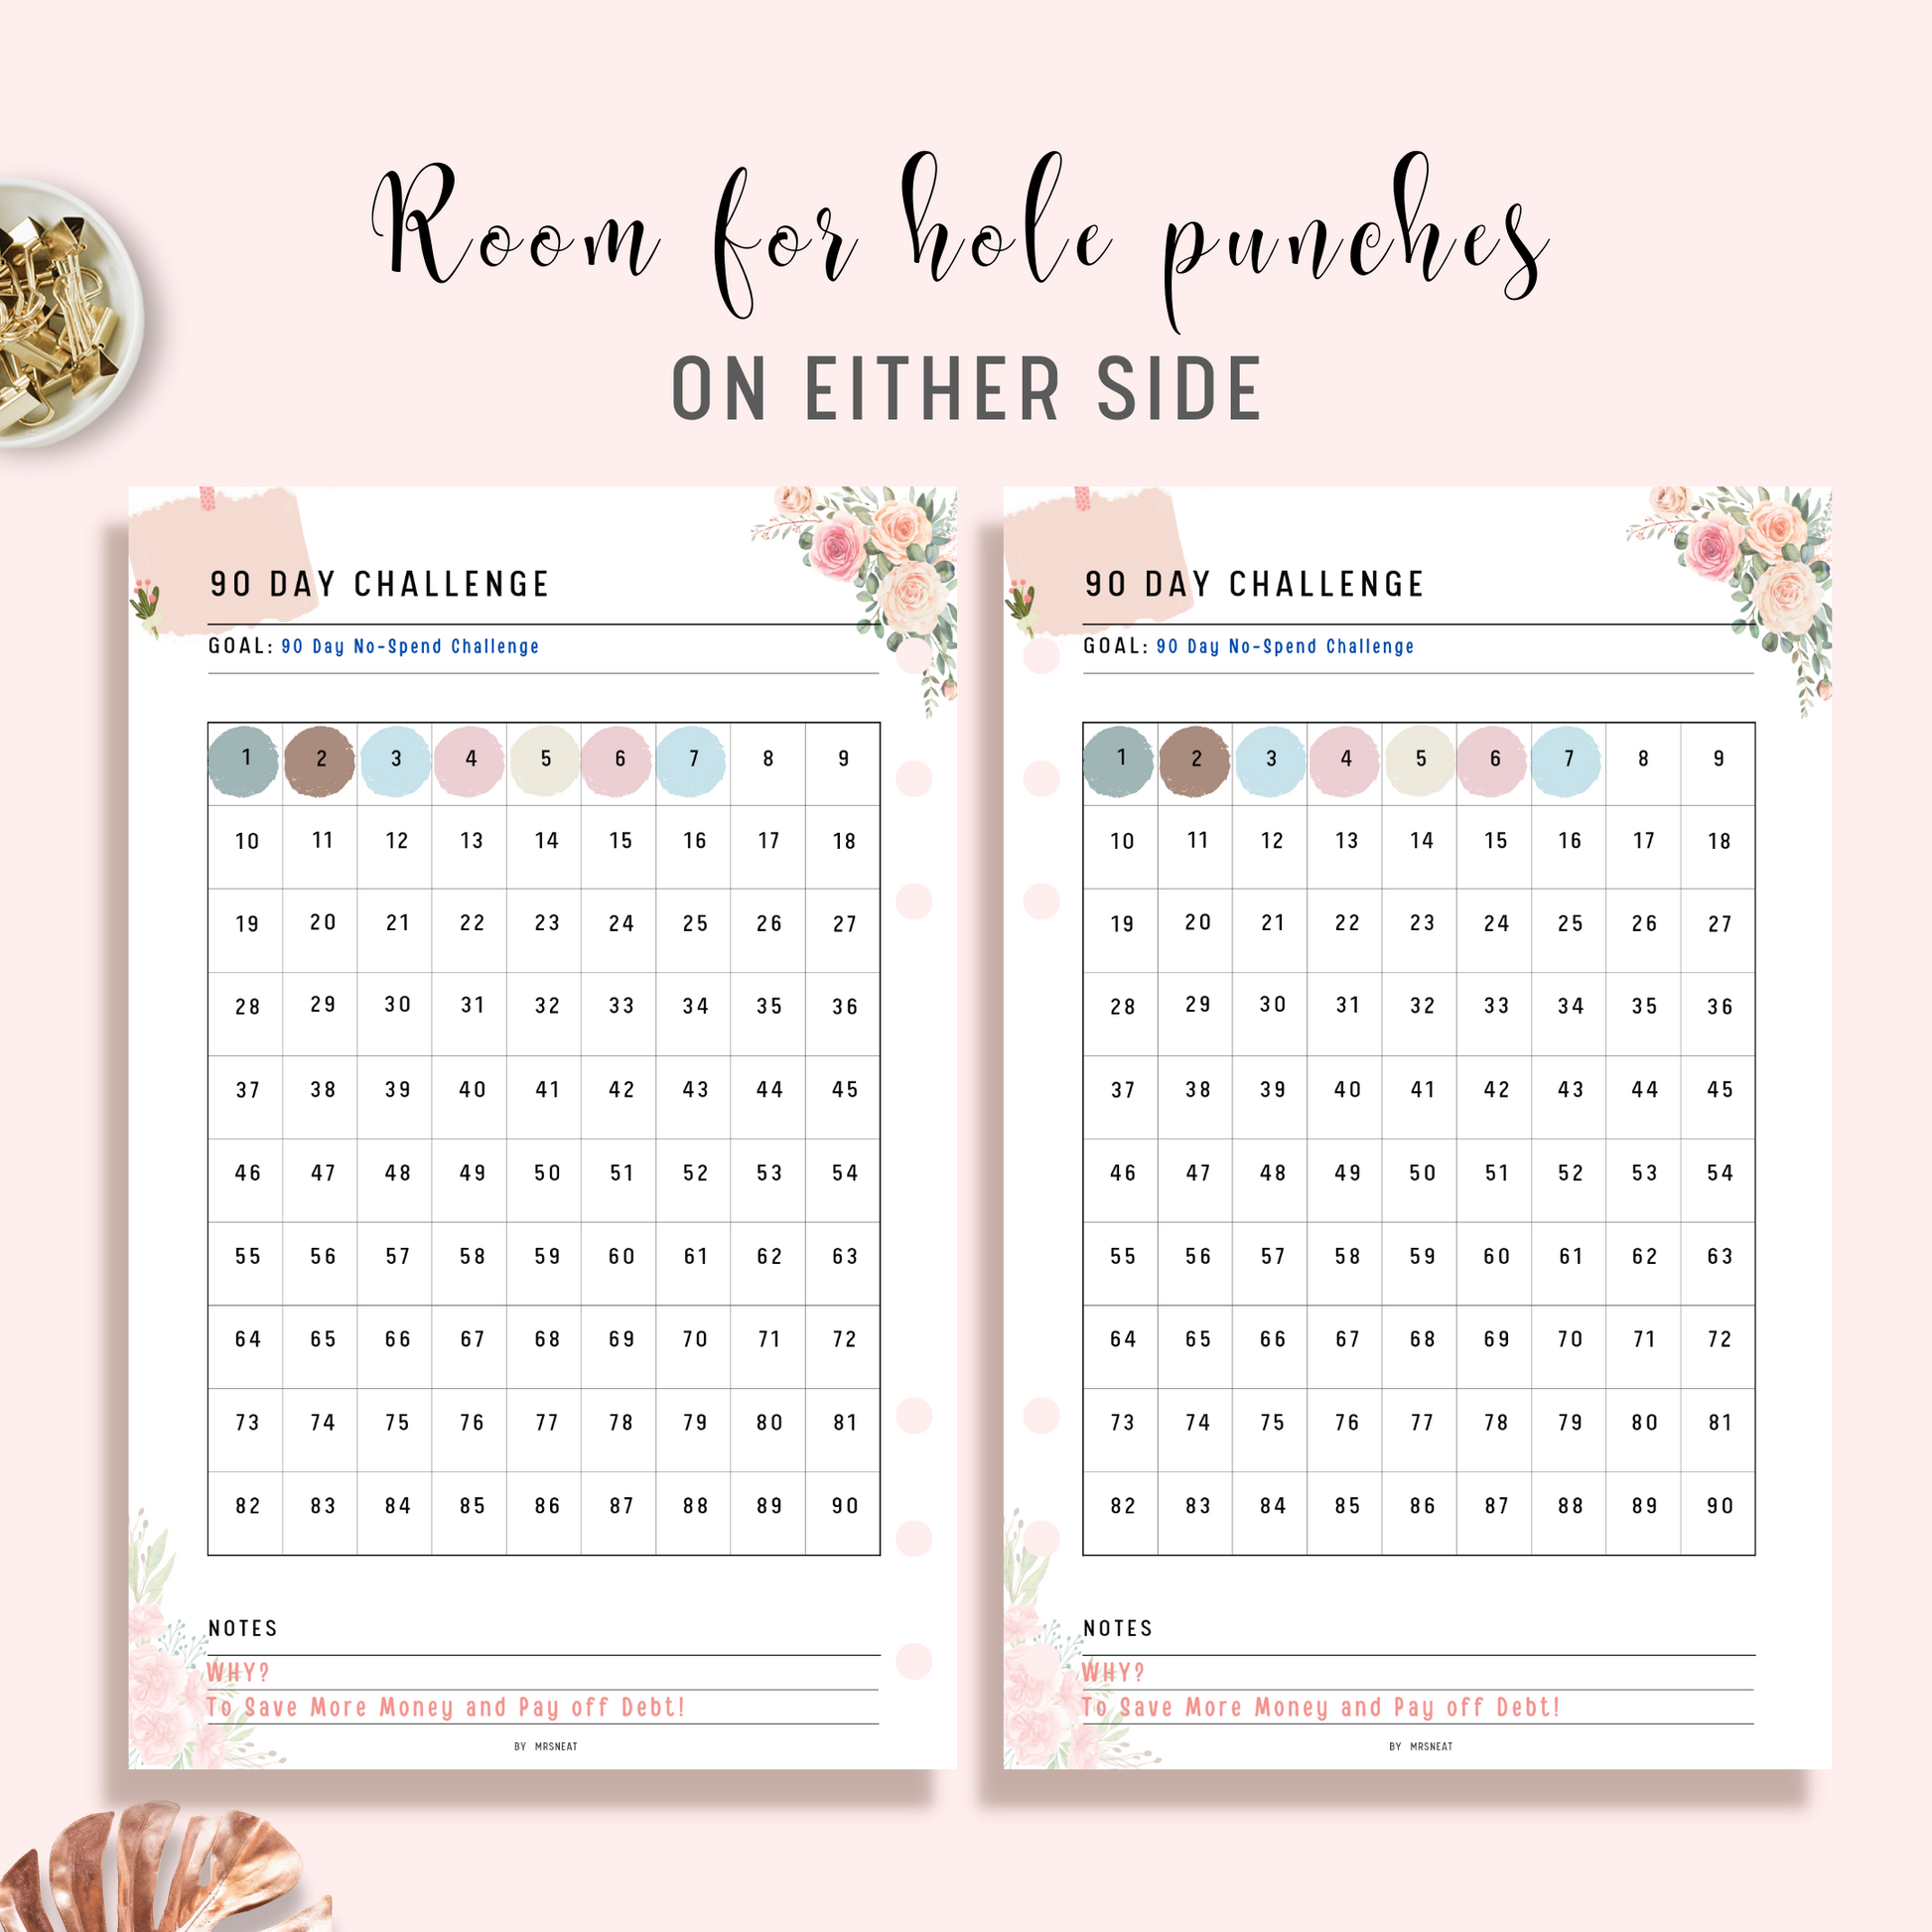 Cute Floral 90 Day Challenge Habit Tracker Printable Planner with room for hole punches on either side